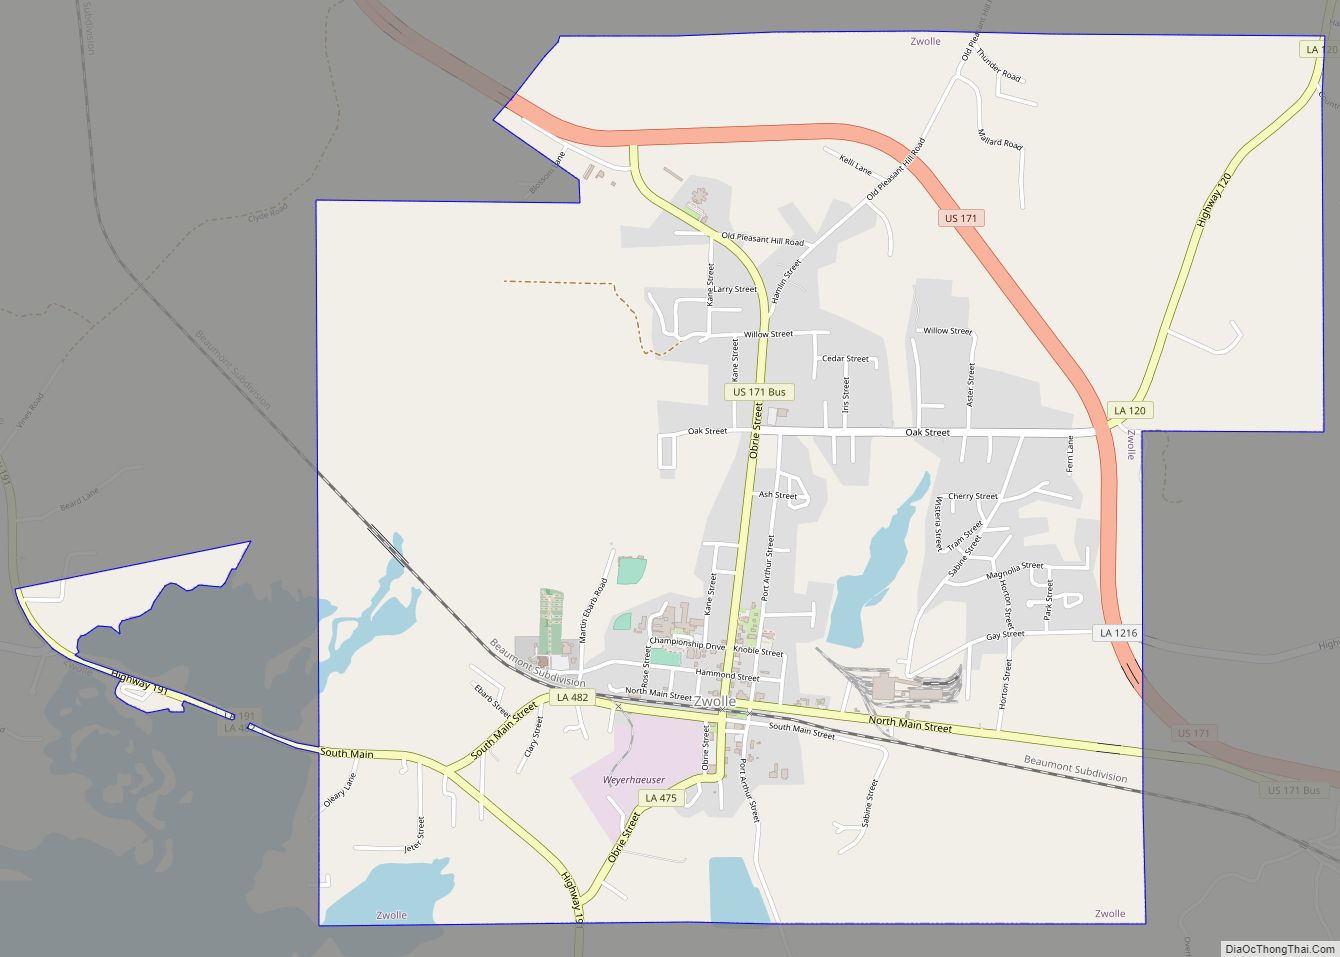 Map of Zwolle town